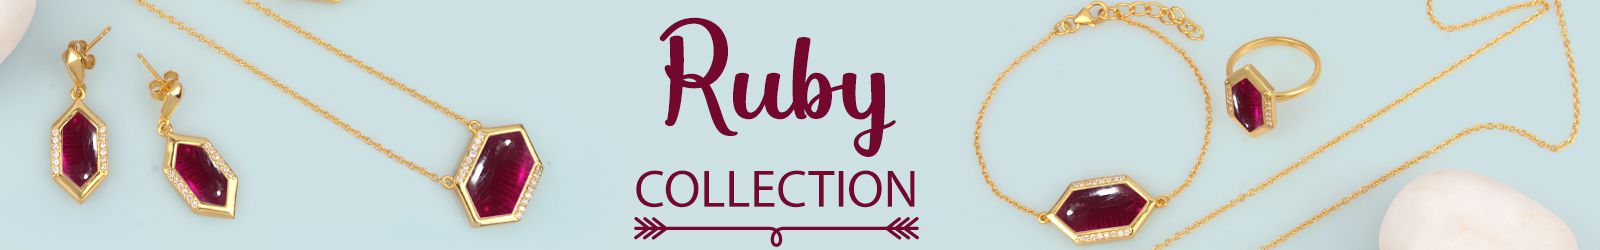 Silver Ruby Jewelry Wholesale Supplier